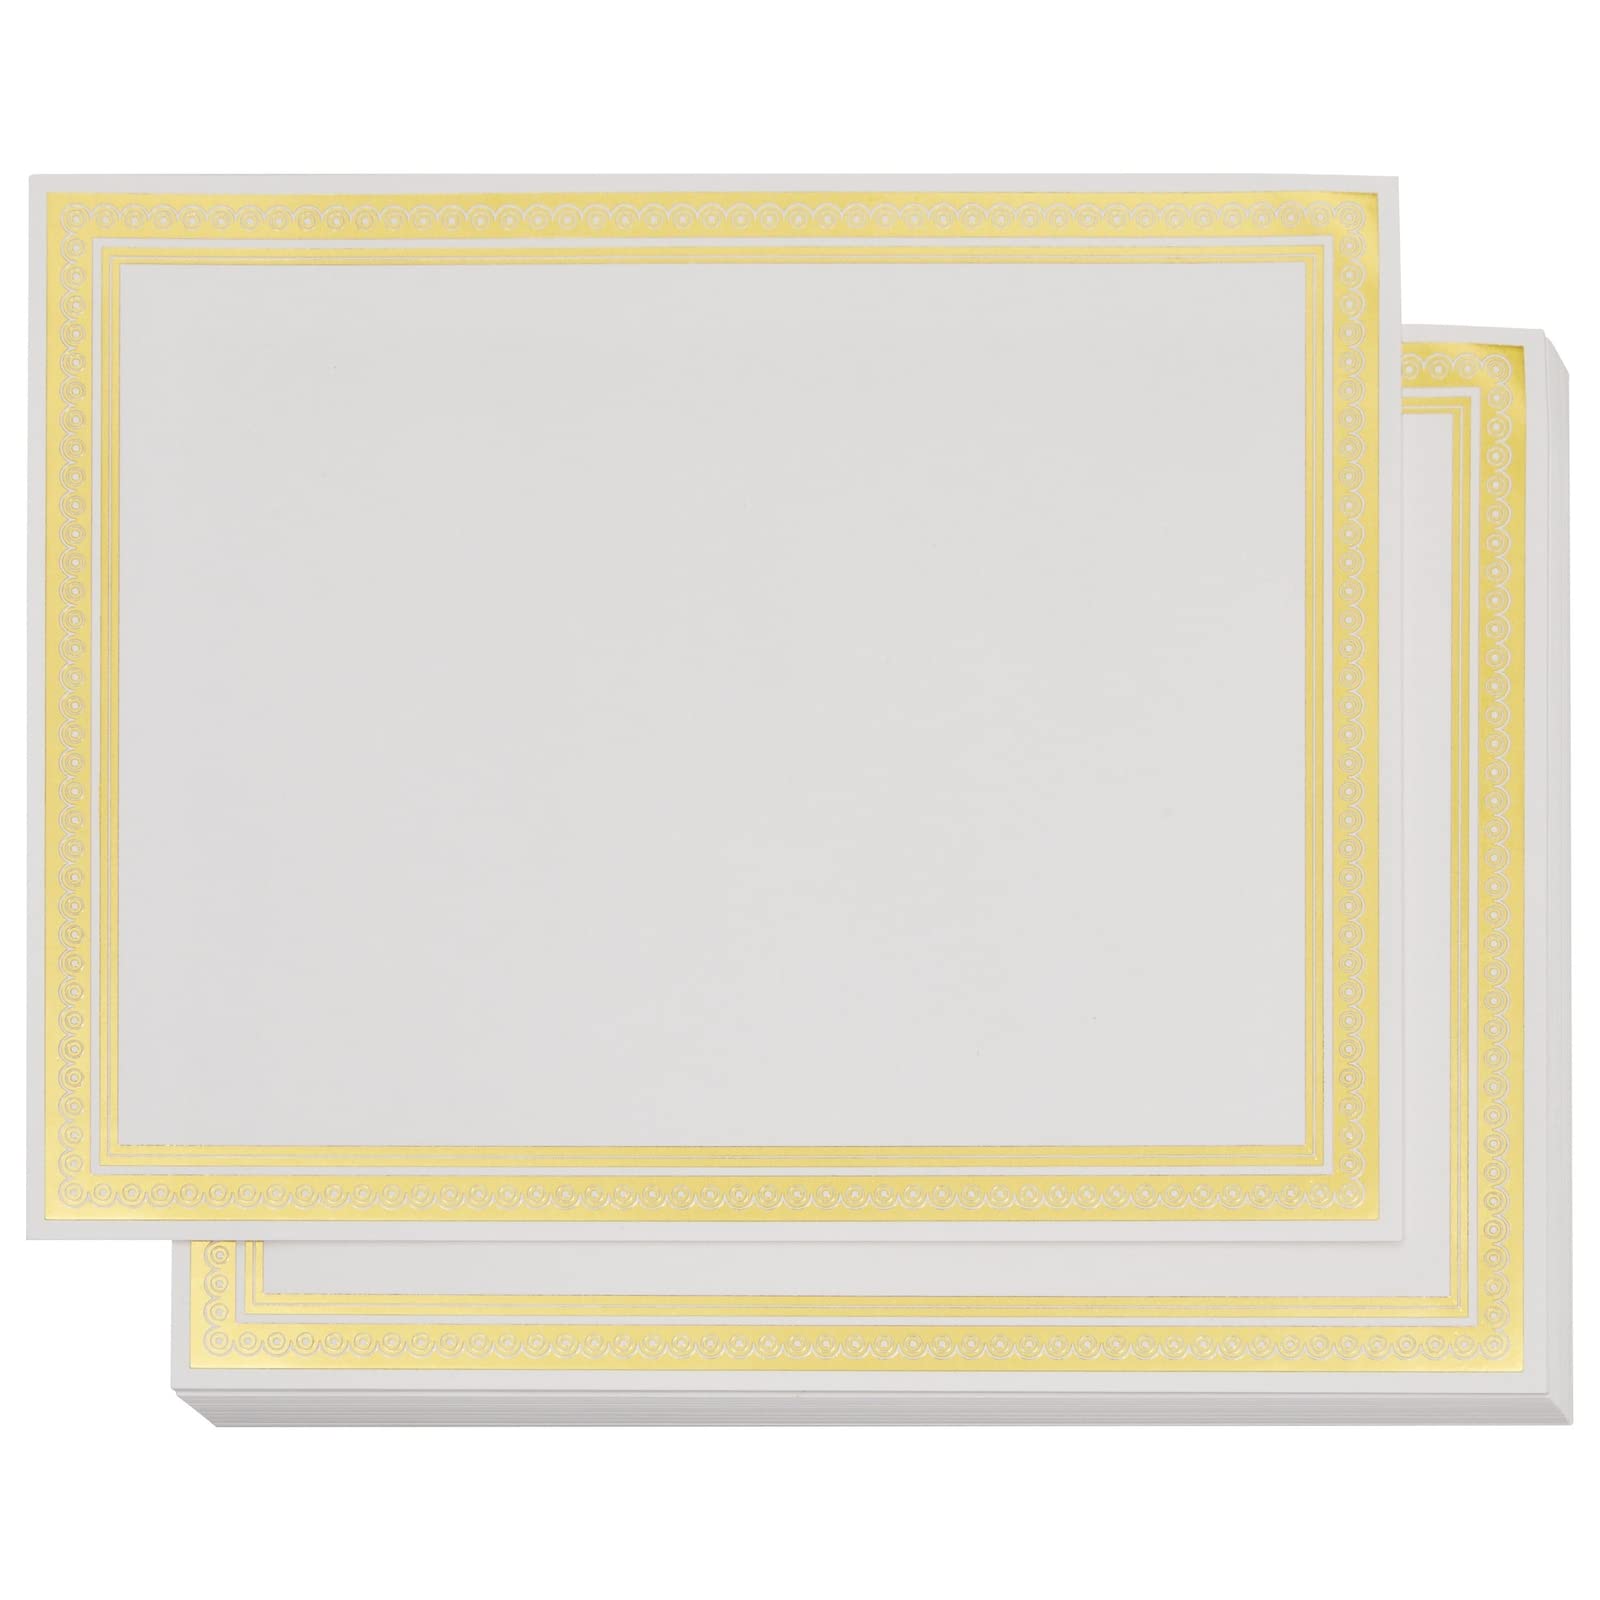 WACHG Juvale 50 Sheets certificate Paper for Printing with gold Foil Border  for graduation Diploma, Achievement Awards (85 x 11 in)